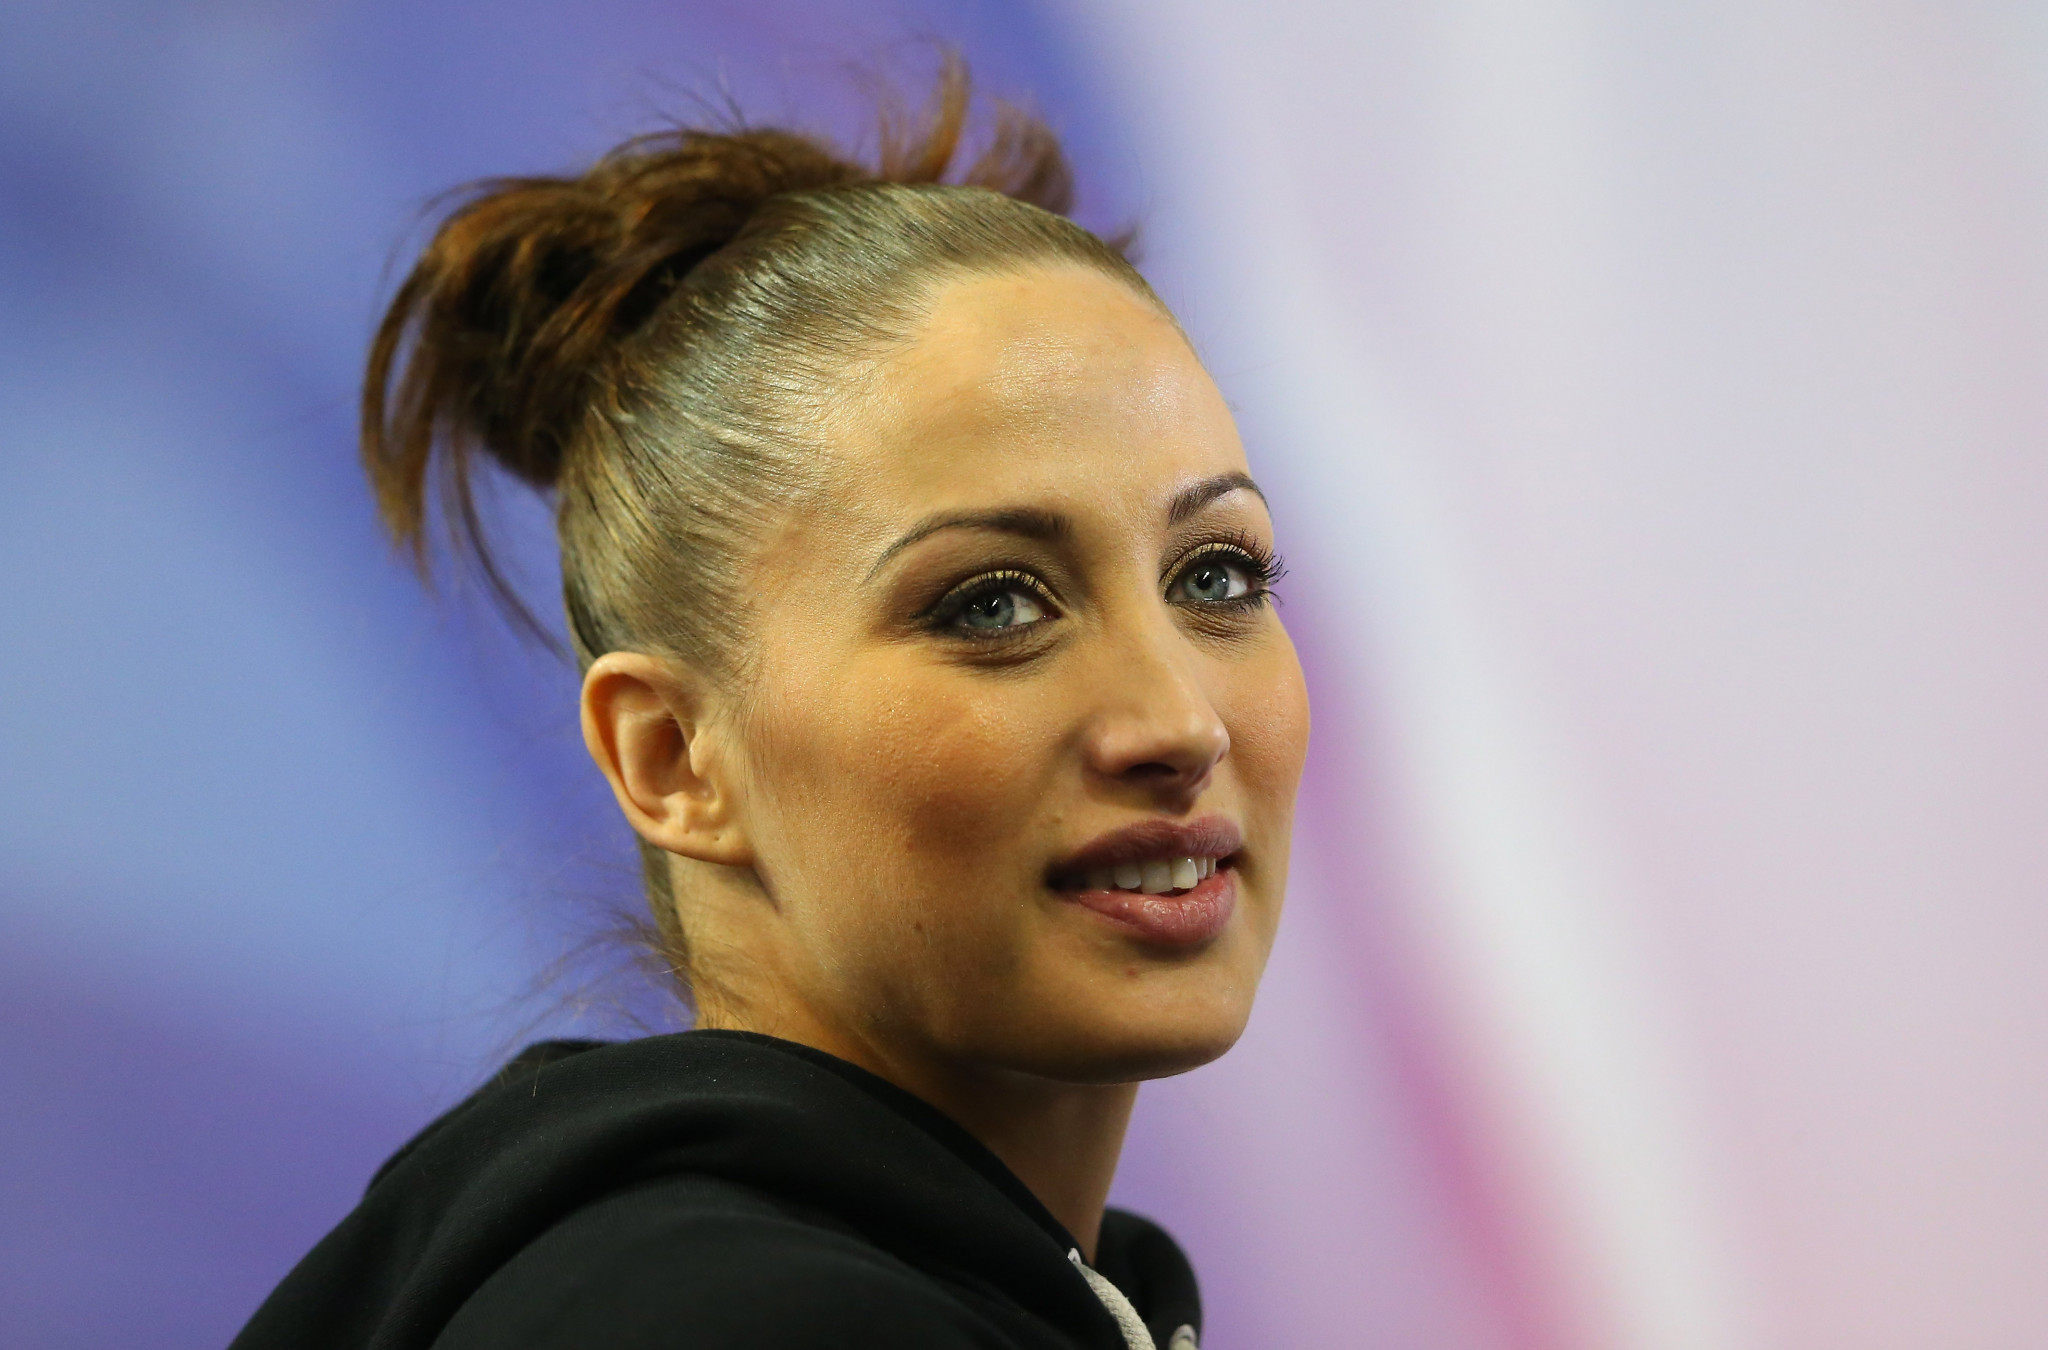 Lisa Mason is one of those gymnasts who have reported abuse ©Getty Images